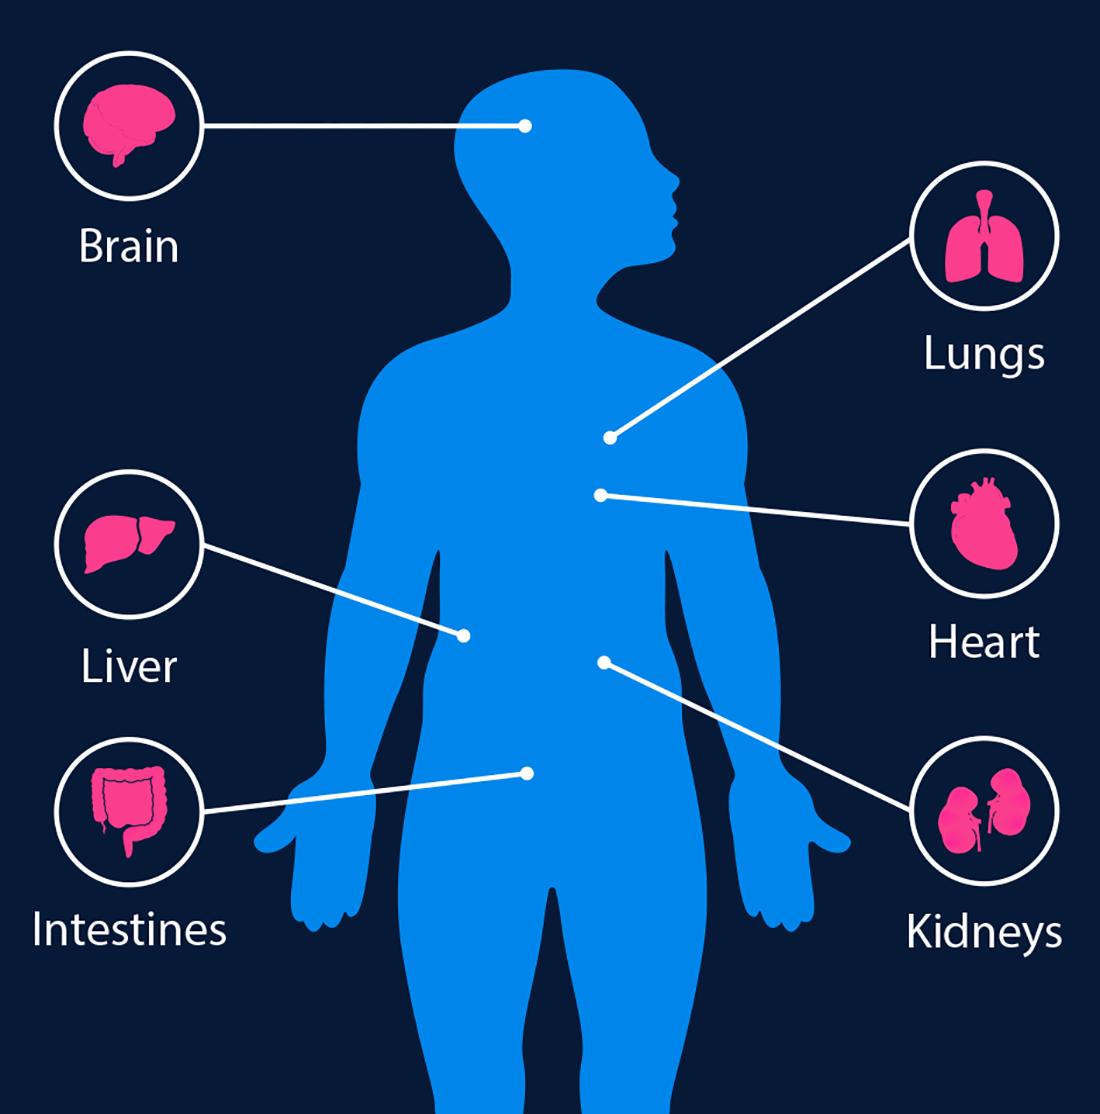 Infographic showing 6 different organs and how they might be affected by GLP-1s. The infographic also summarizes impact on diabetes.